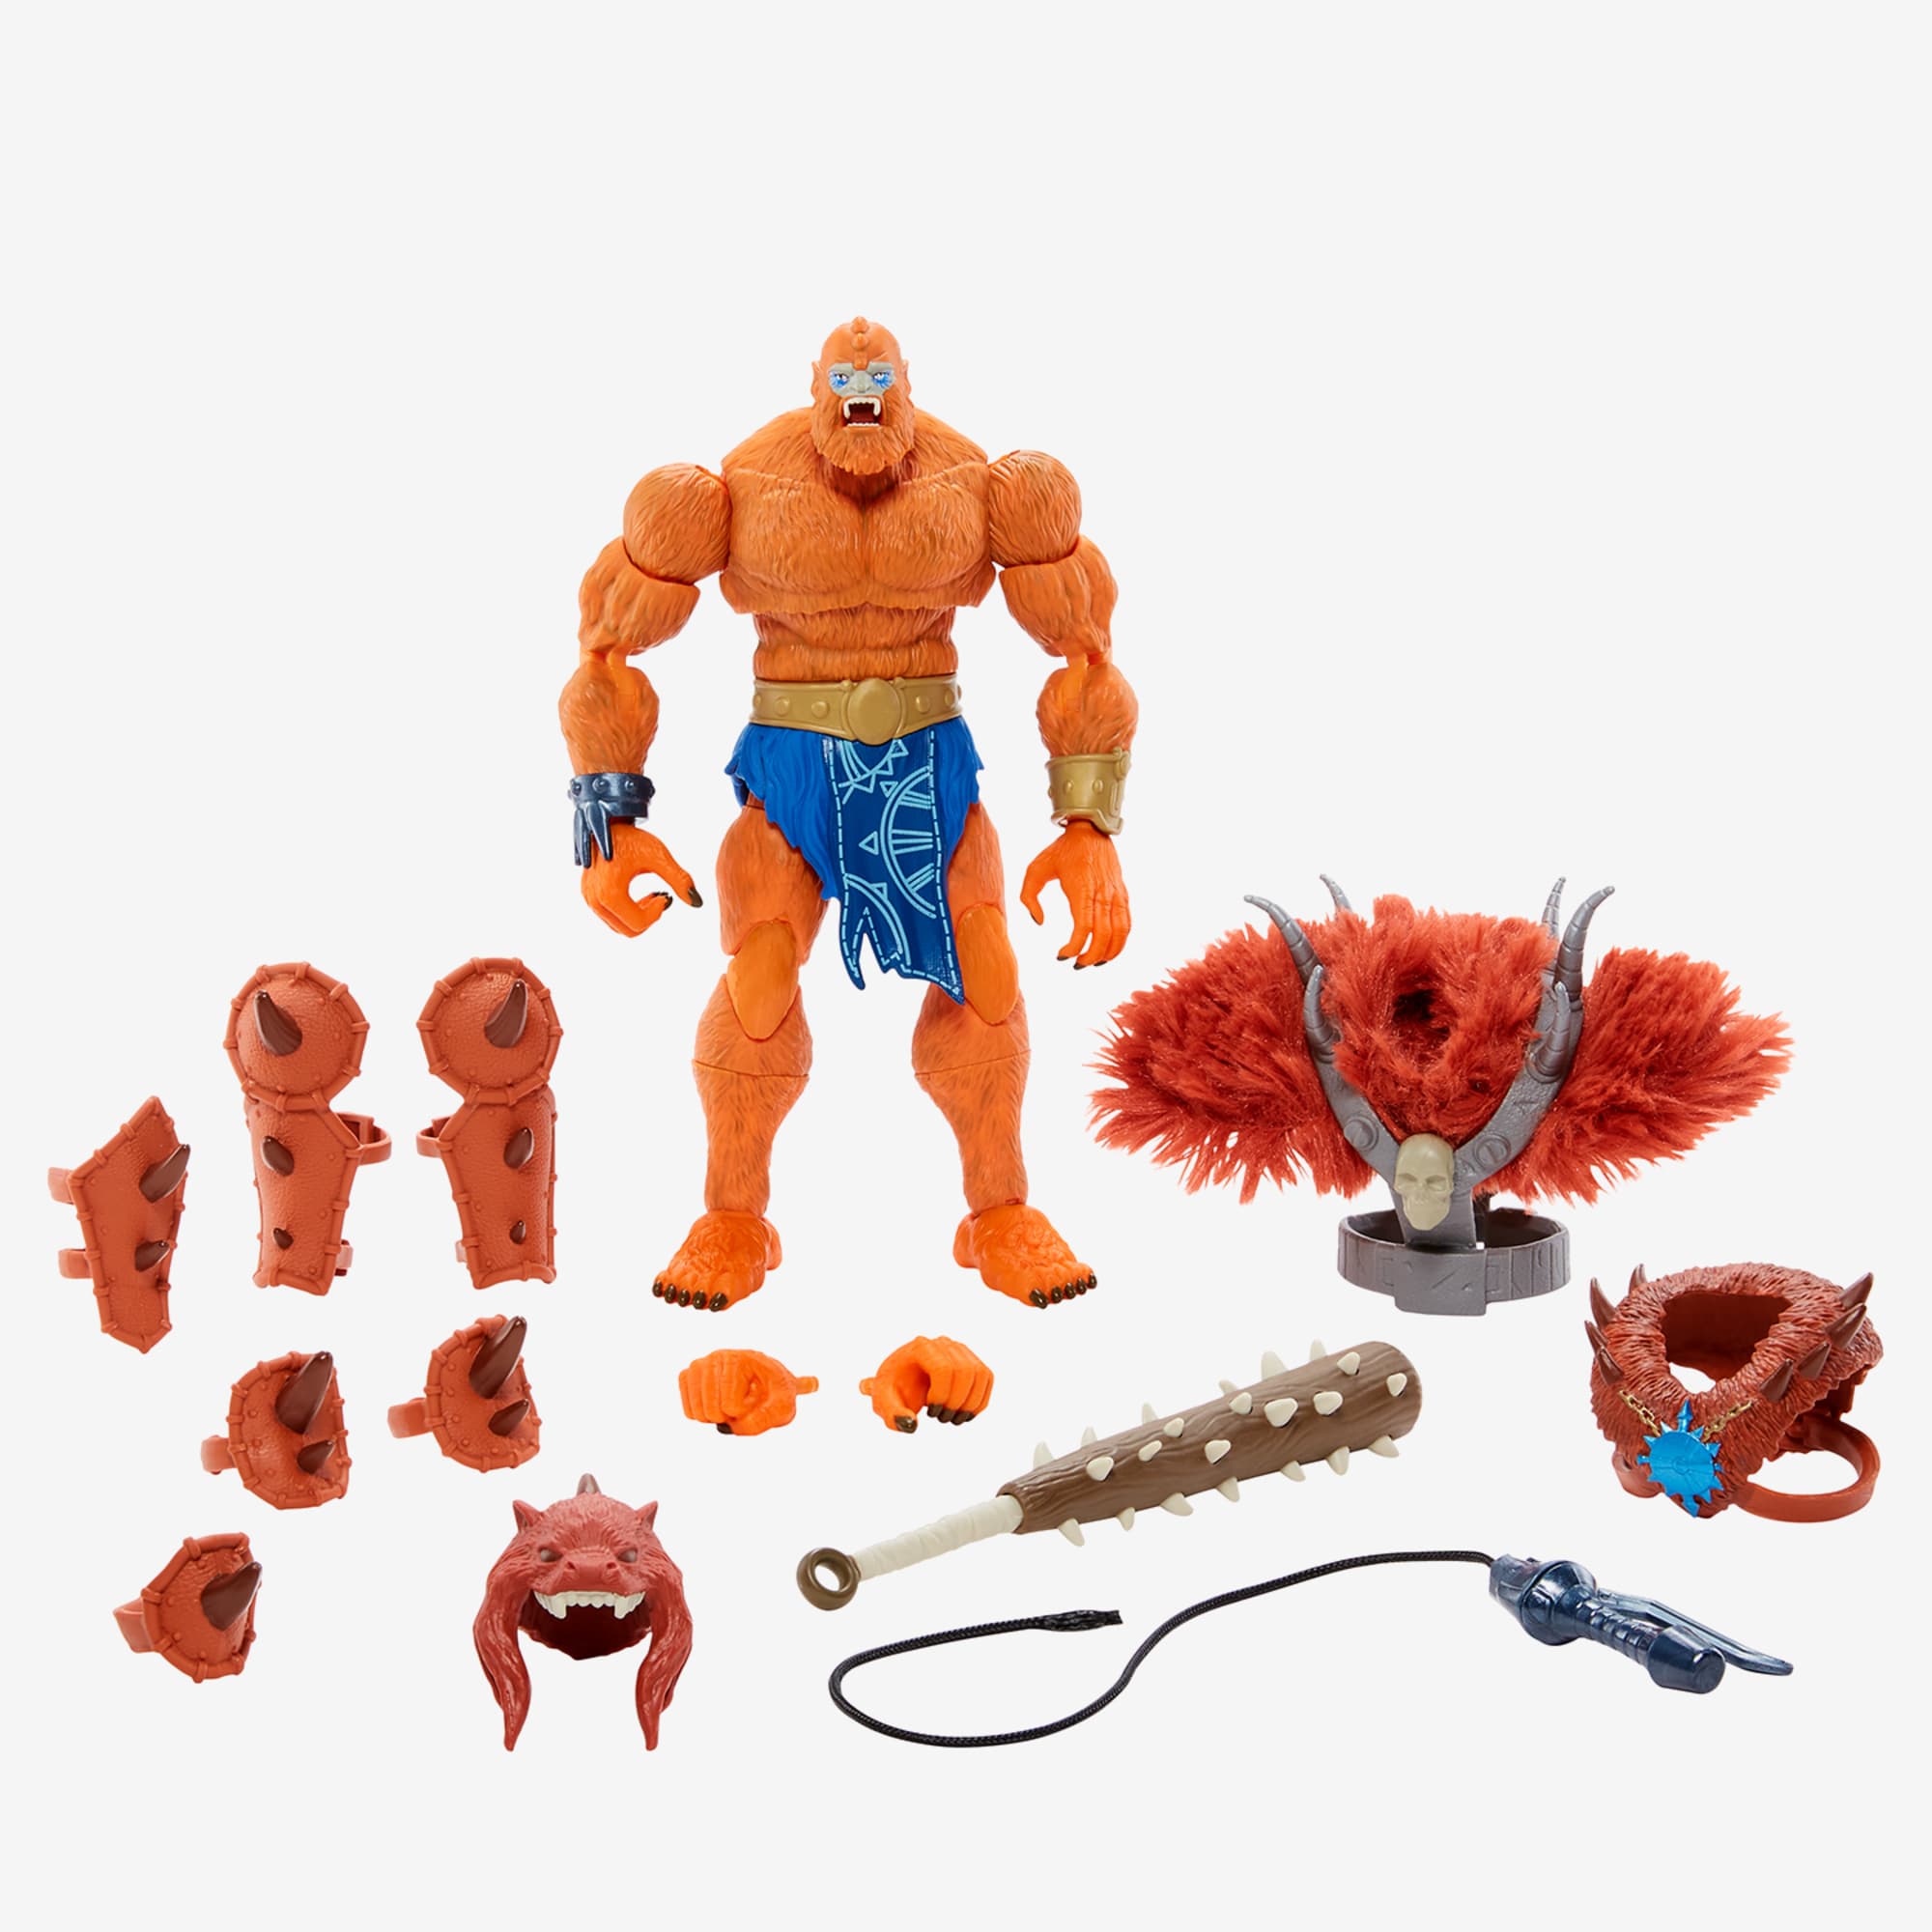 Masters of the Universe Masterverse Deluxe Beast Man Action Figure